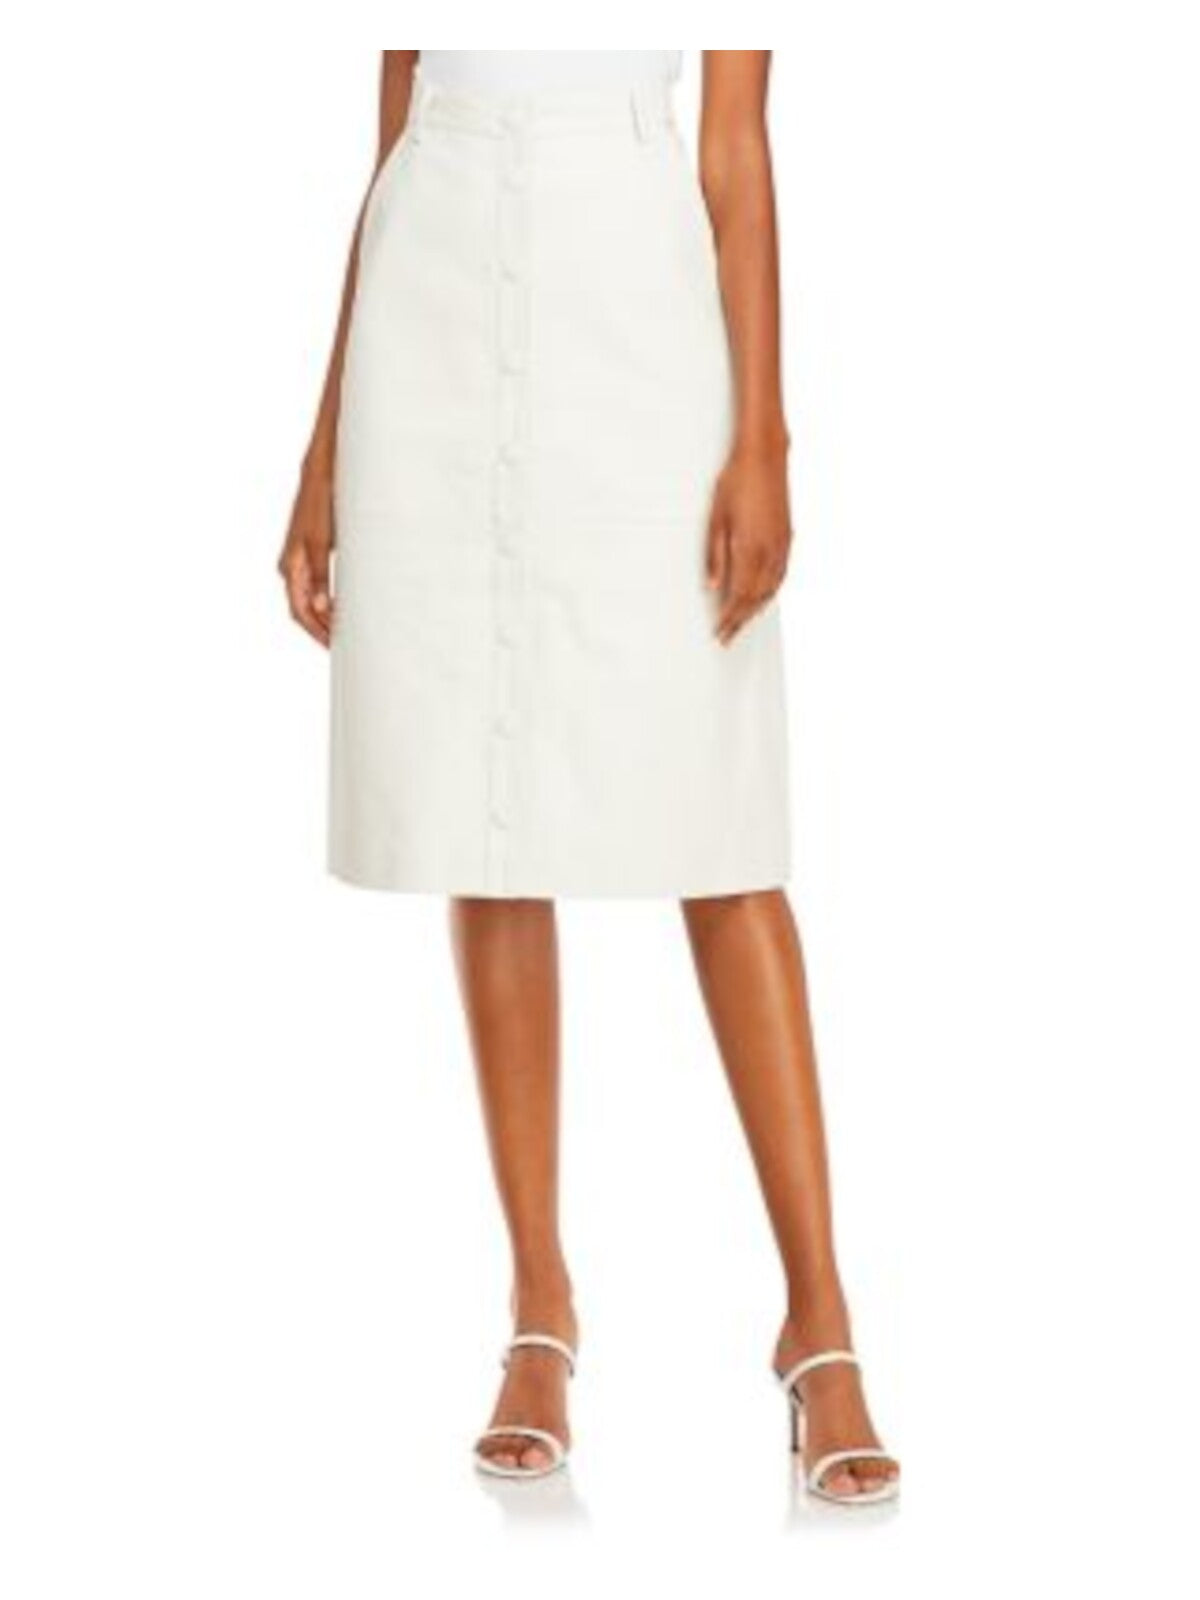 REMAIN Womens White Pocketed Snap Button Up Lined Below The Knee Cocktail A-Line Skirt 4